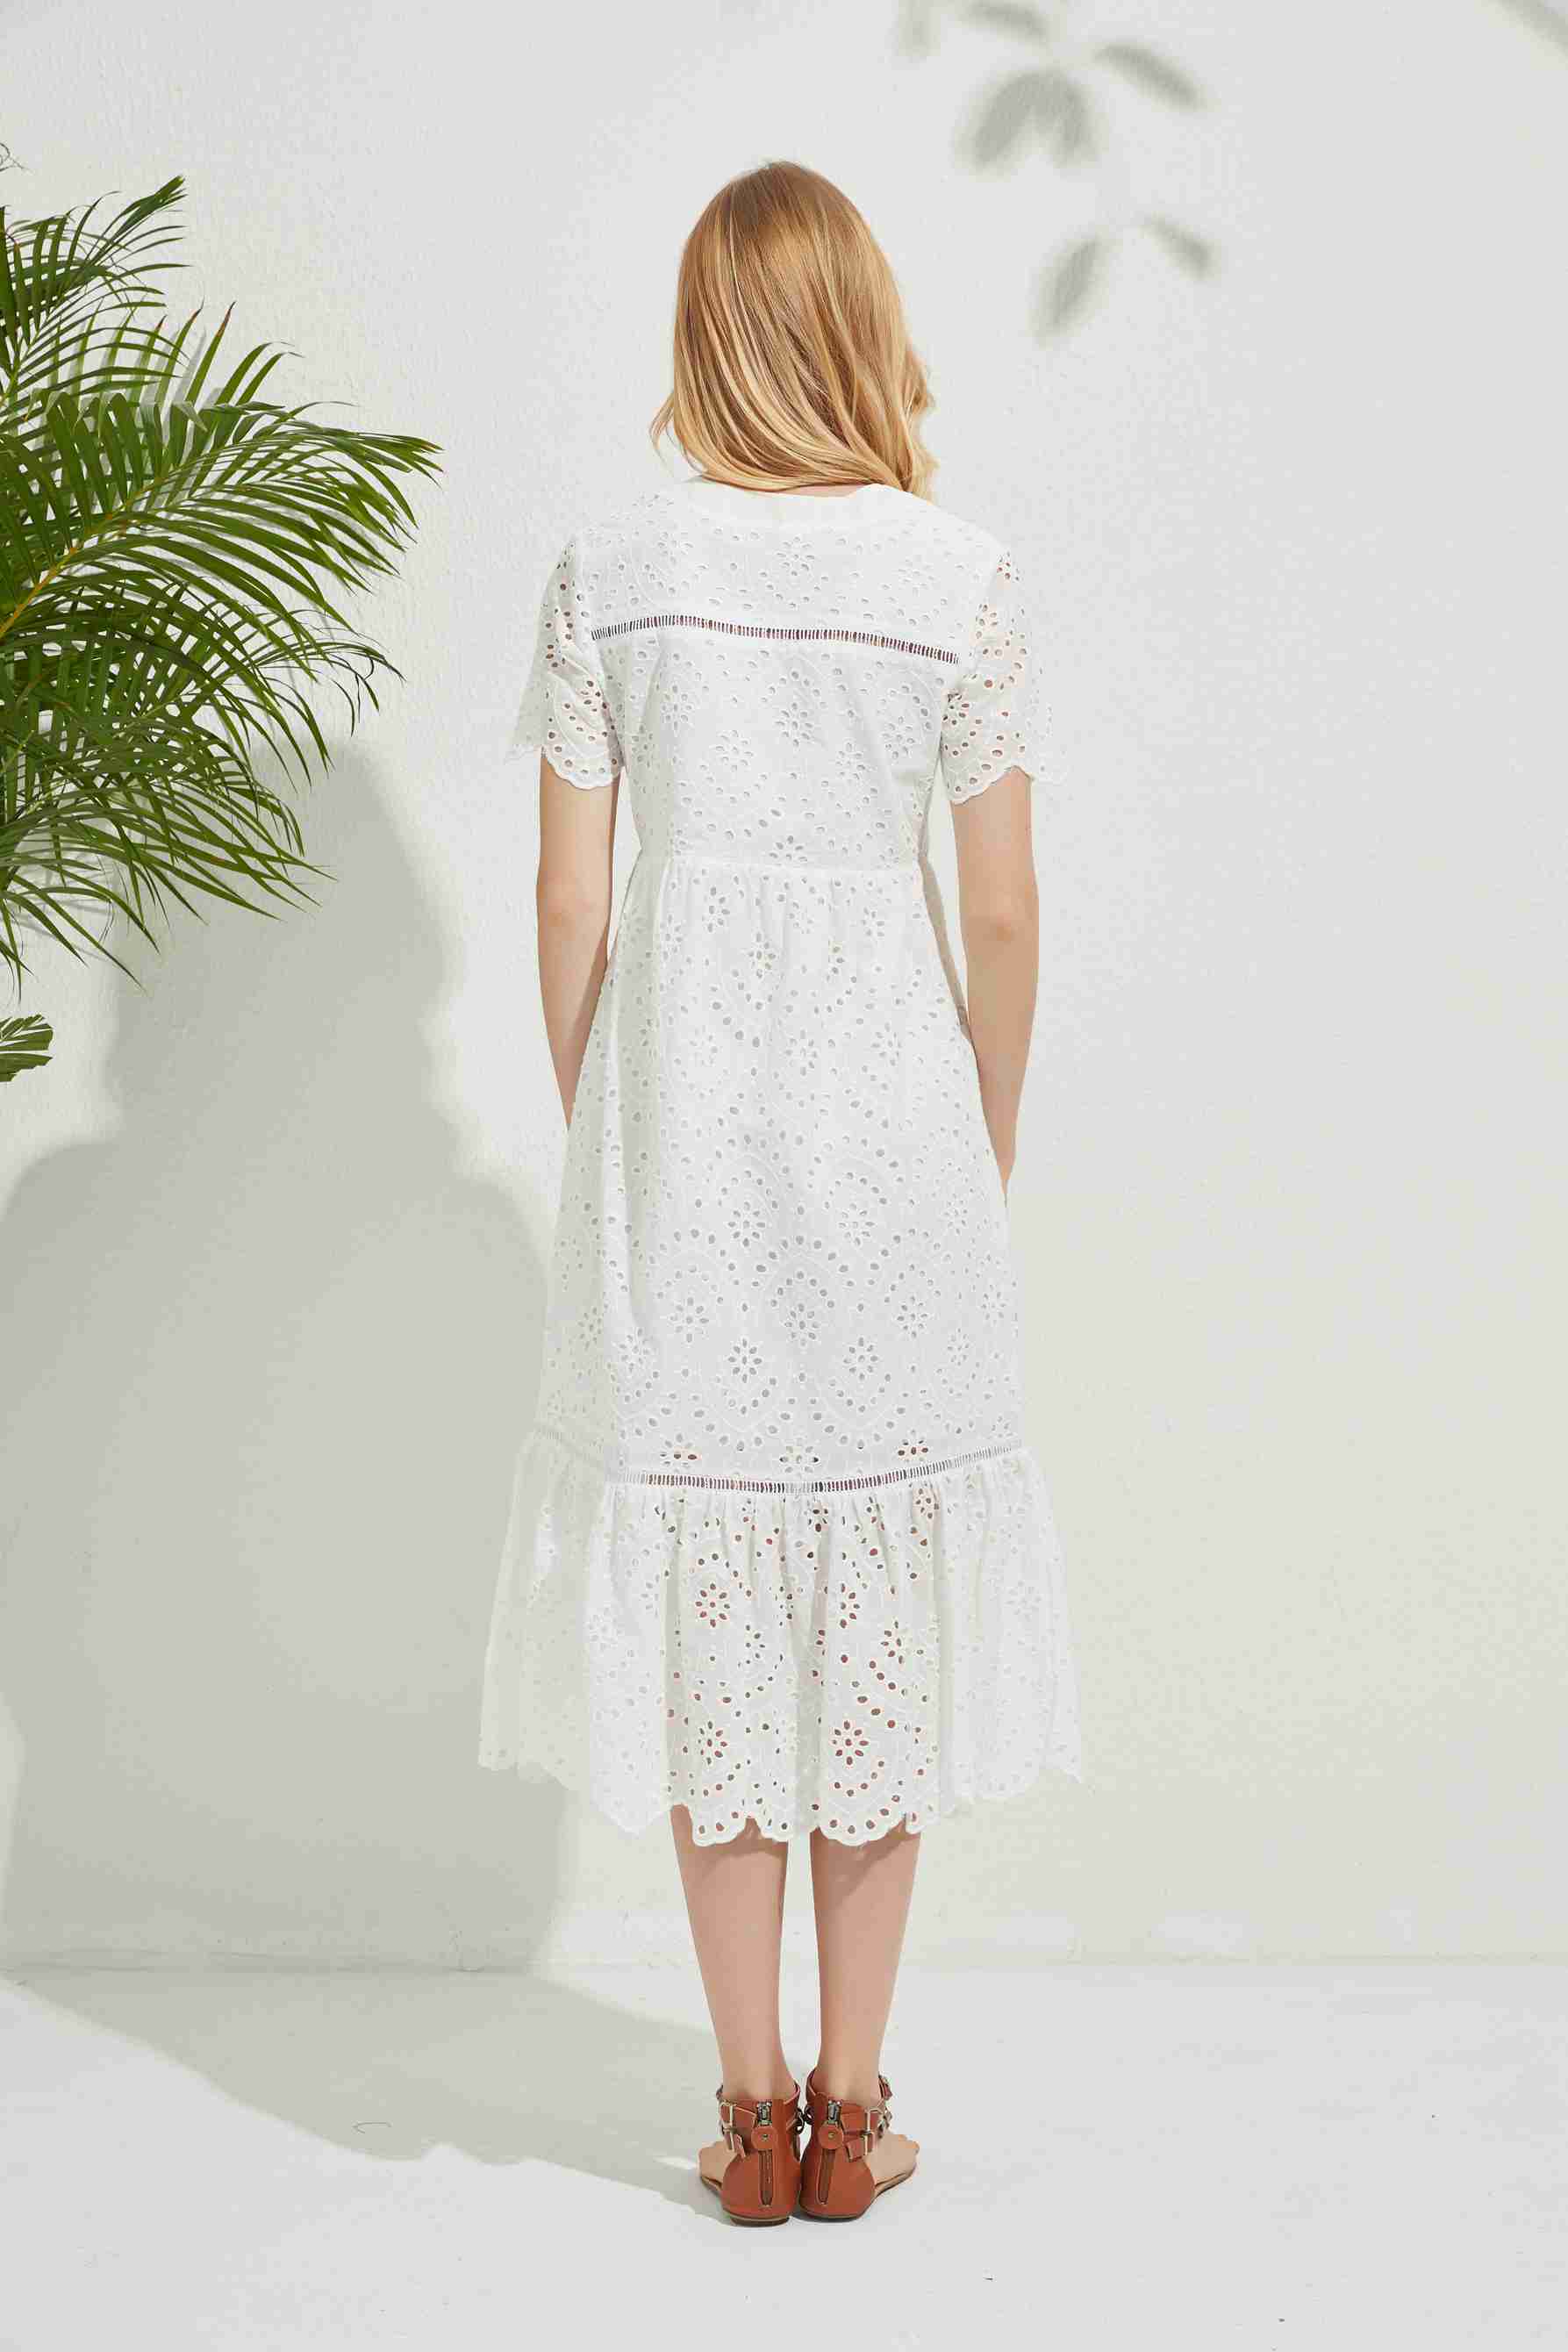 Women's white lace large V-neck hollow splicing Short Sleeve Dress